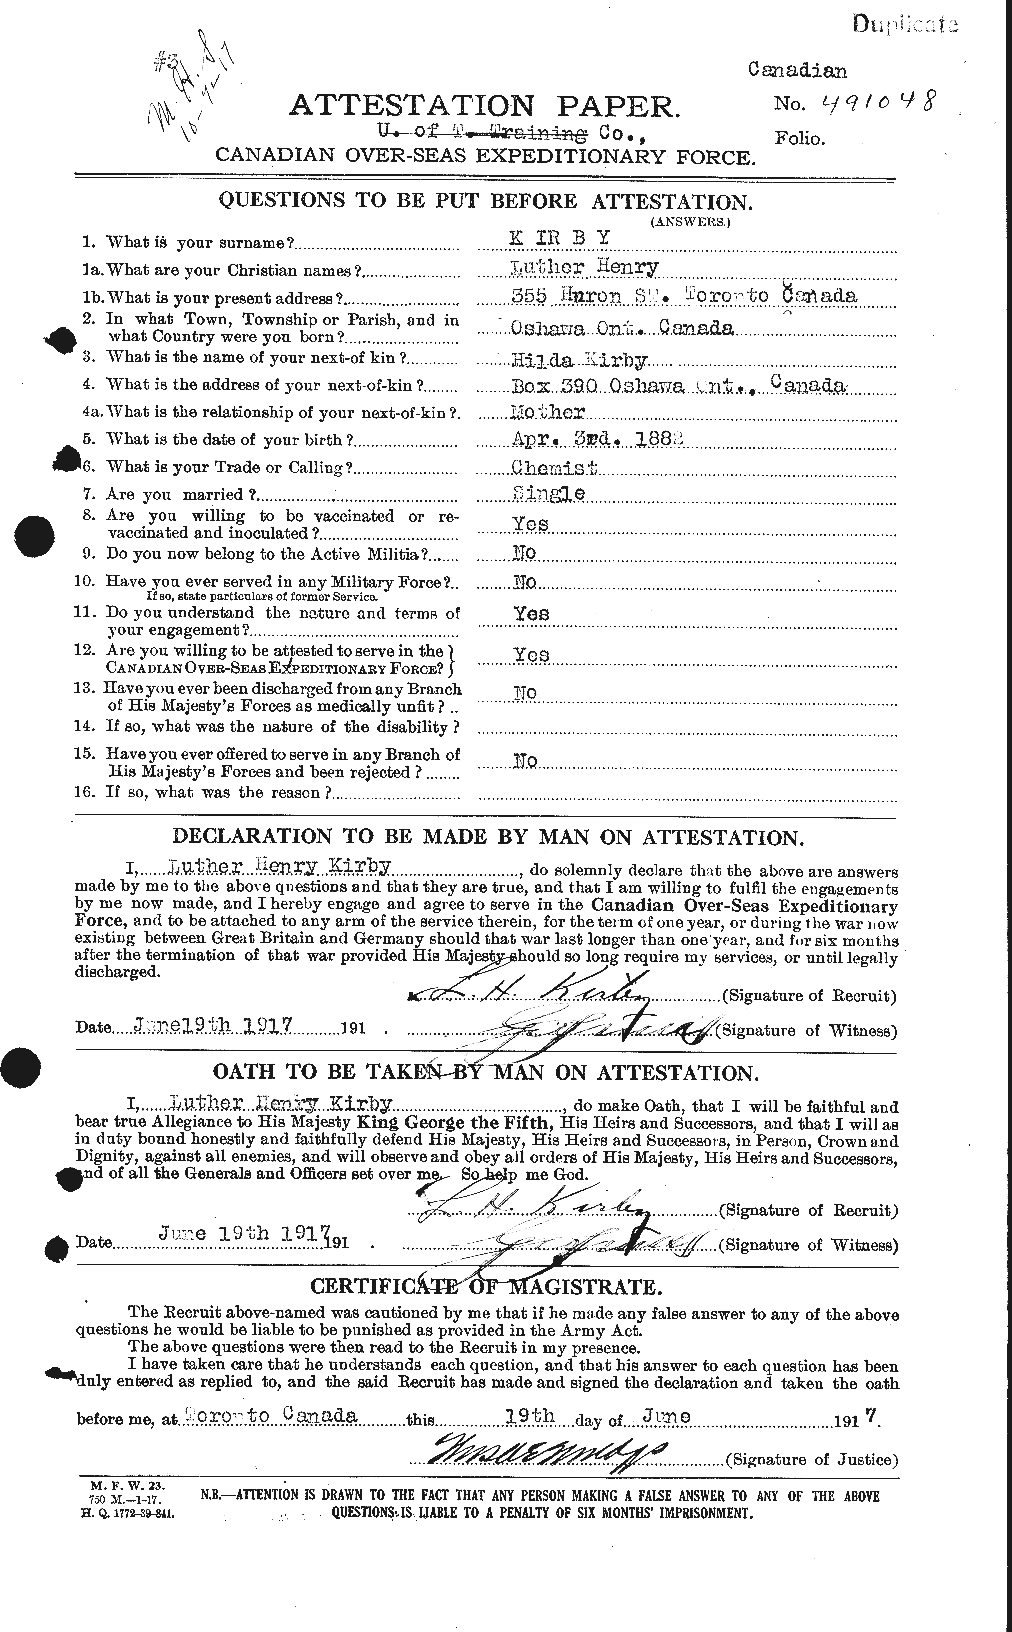 Personnel Records of the First World War - CEF 437252a